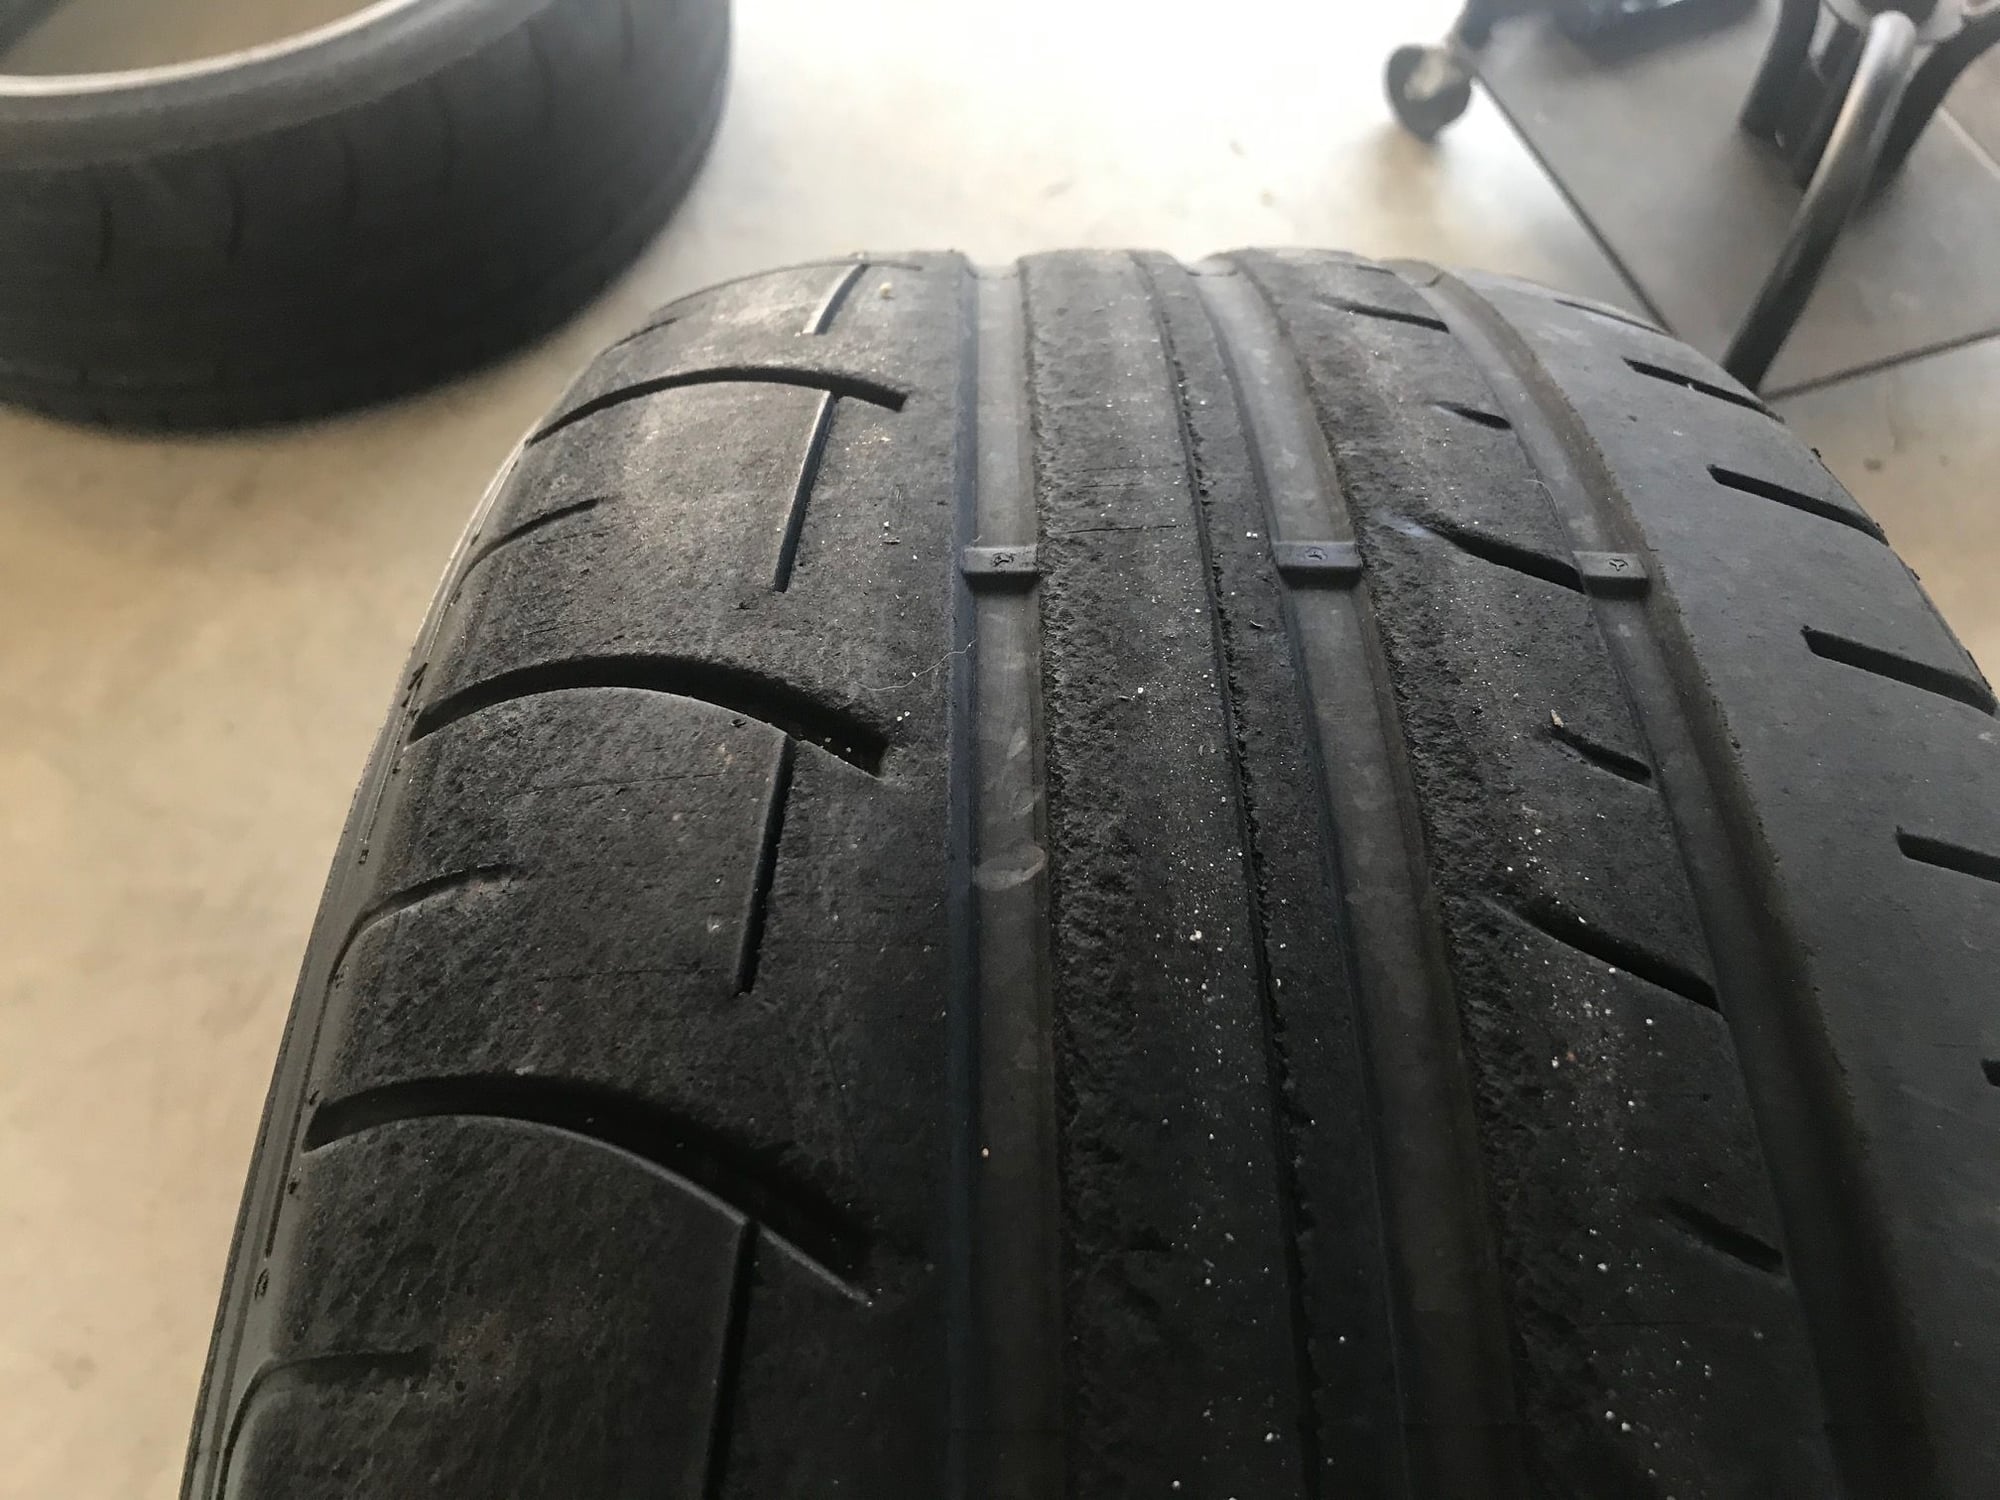 Wheels and Tires/Axles - Dunlop Sport Maxx Race tires - GT4 sizes - Used - 2013 to 2019 Porsche Cayman GT4 - 2012 to 2016 Porsche 911 - 2013 to 2019 Porsche Boxster - 2013 to 2019 Porsche Cayman - Bedford, NH 03110, United States